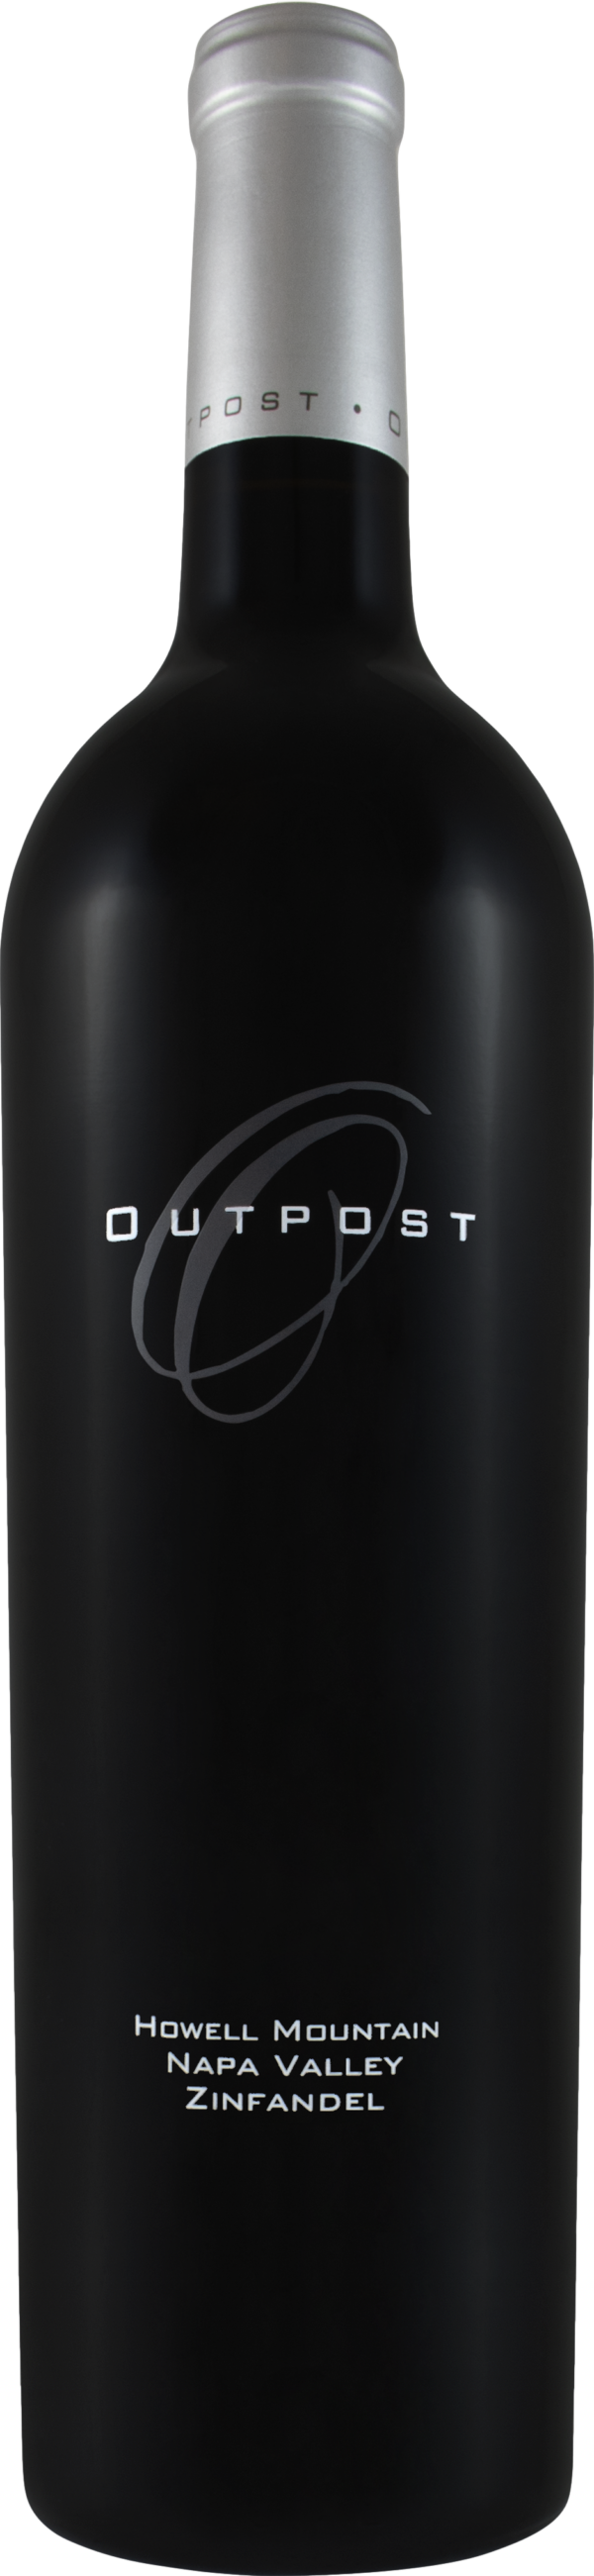 Product image of Outpost Howell Mountain Zinfandel 2017 from 8wines